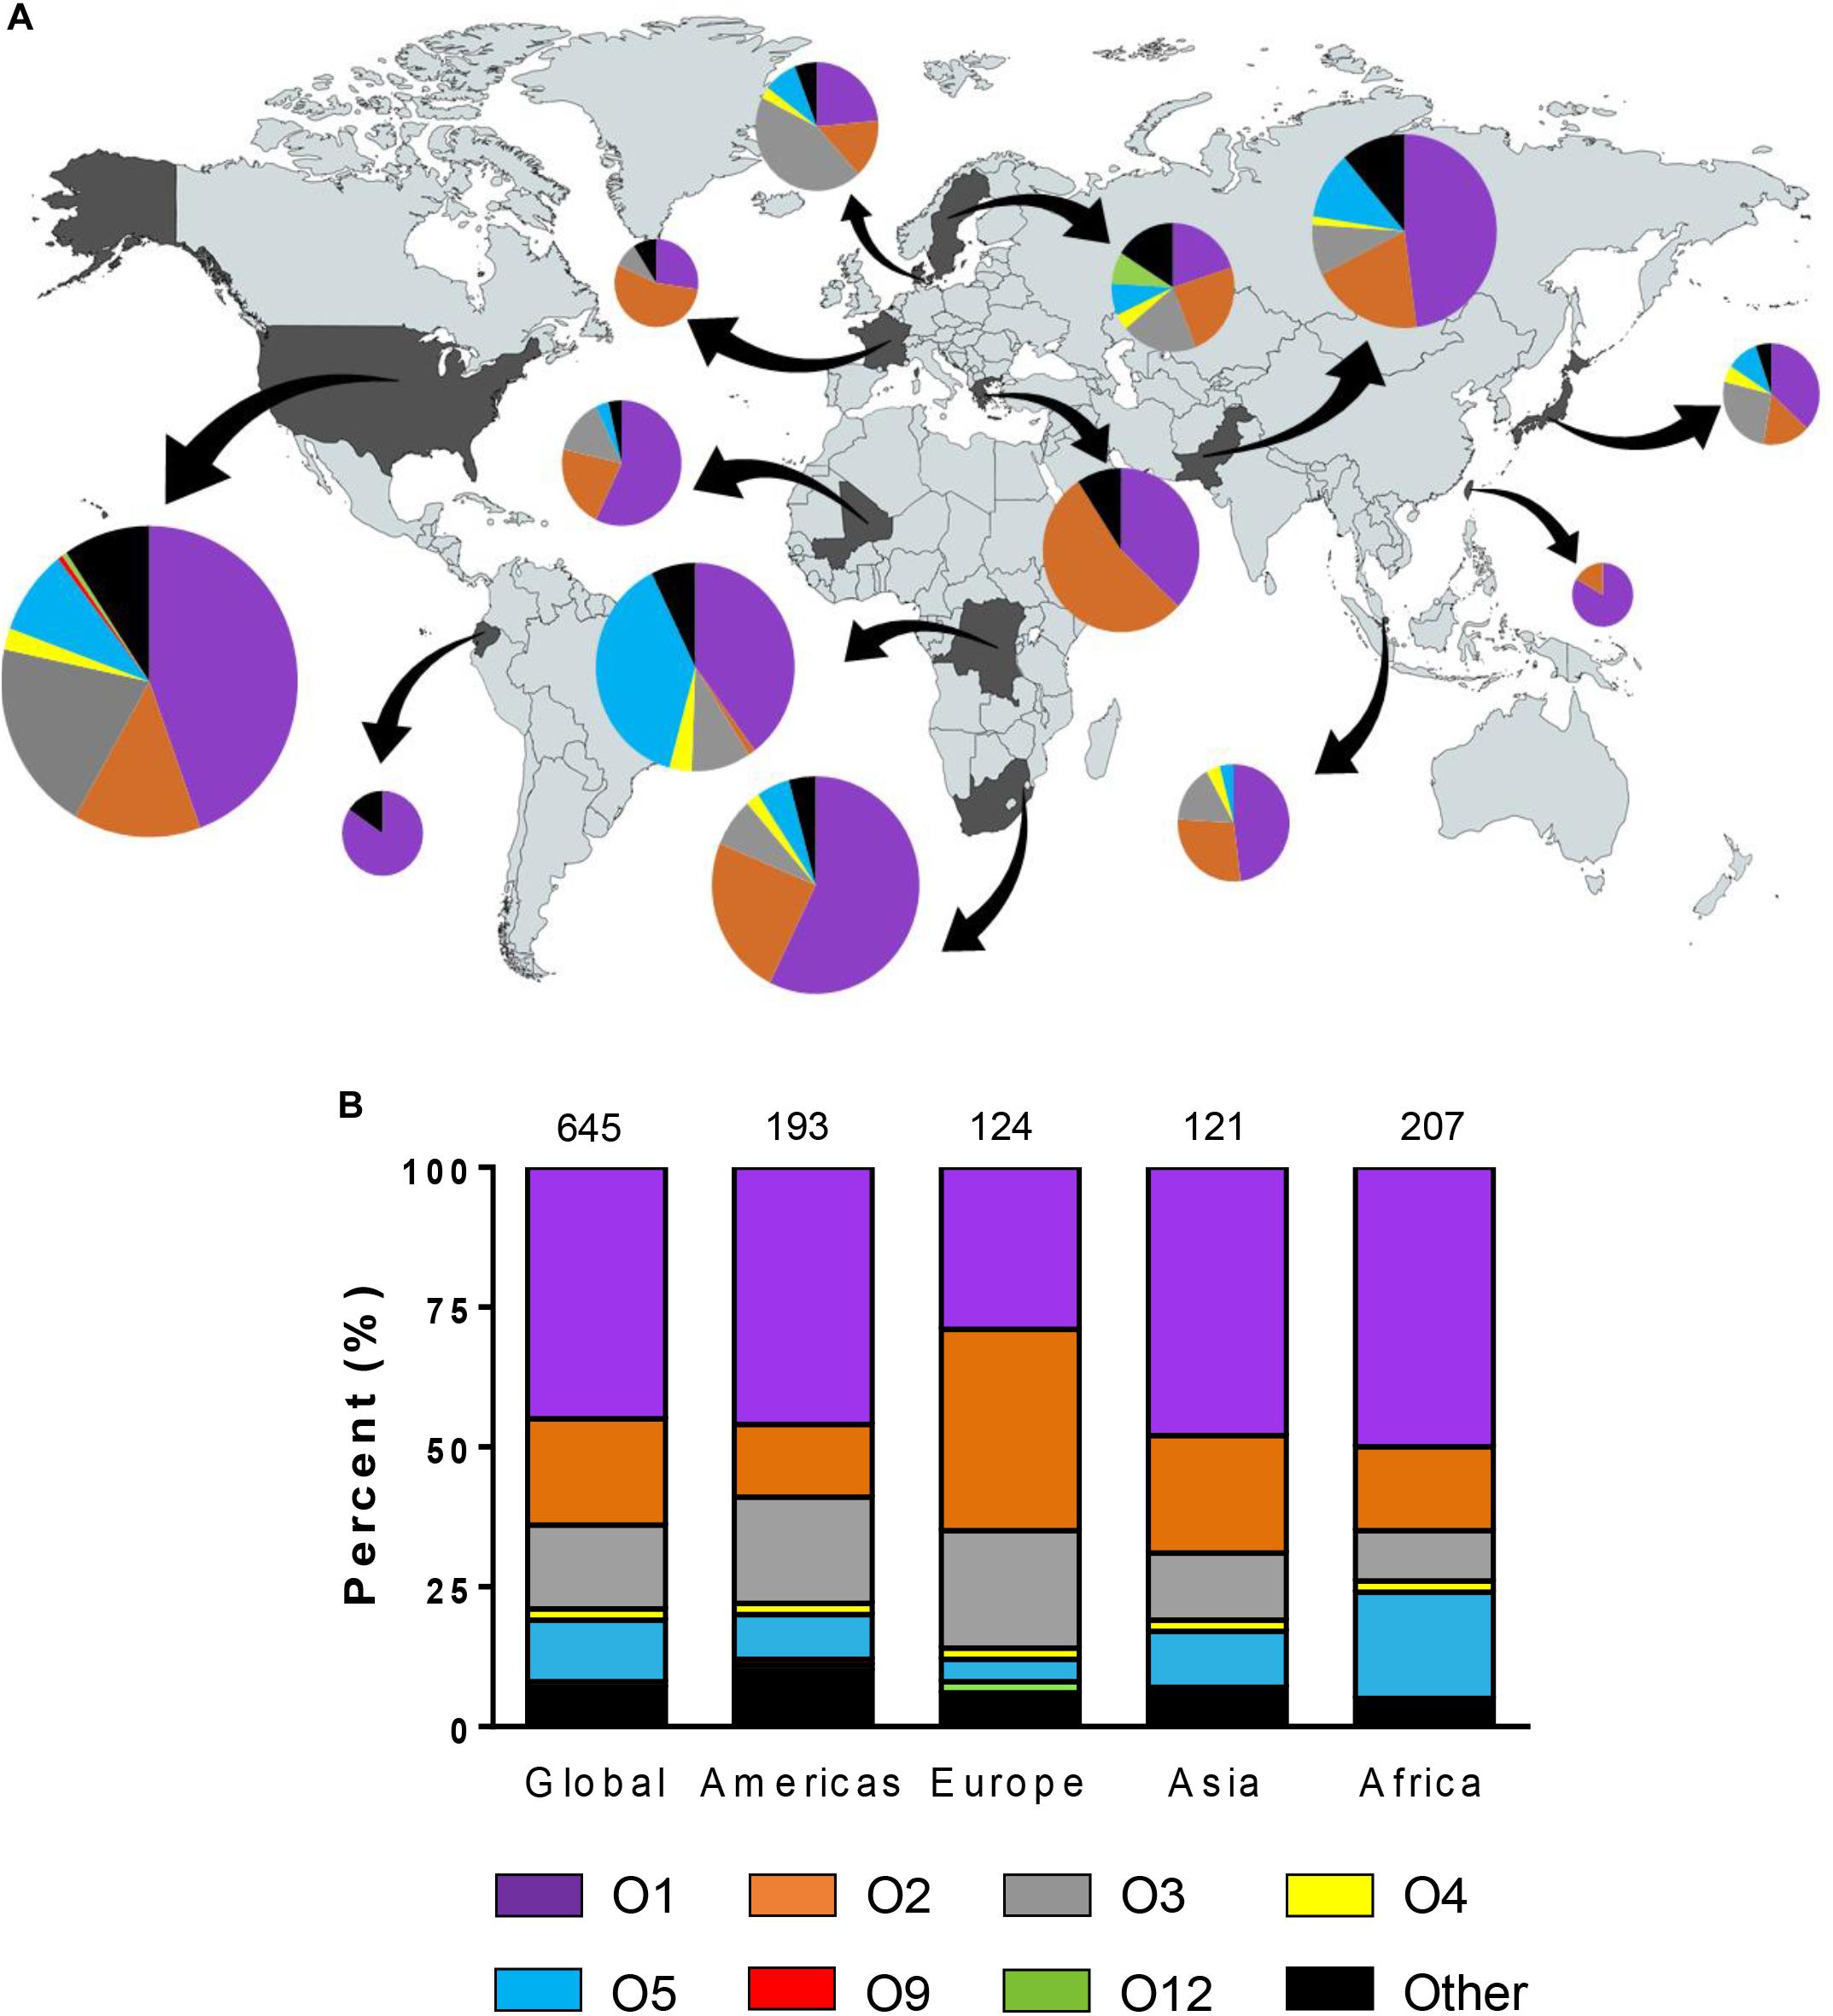 Frontiers The Diversity Of Lipopolysaccharide O And Capsular Polysaccharide K Antigens Of Invasive Klebsiella Pneumoniae In A Multi Country Collection Microbiology